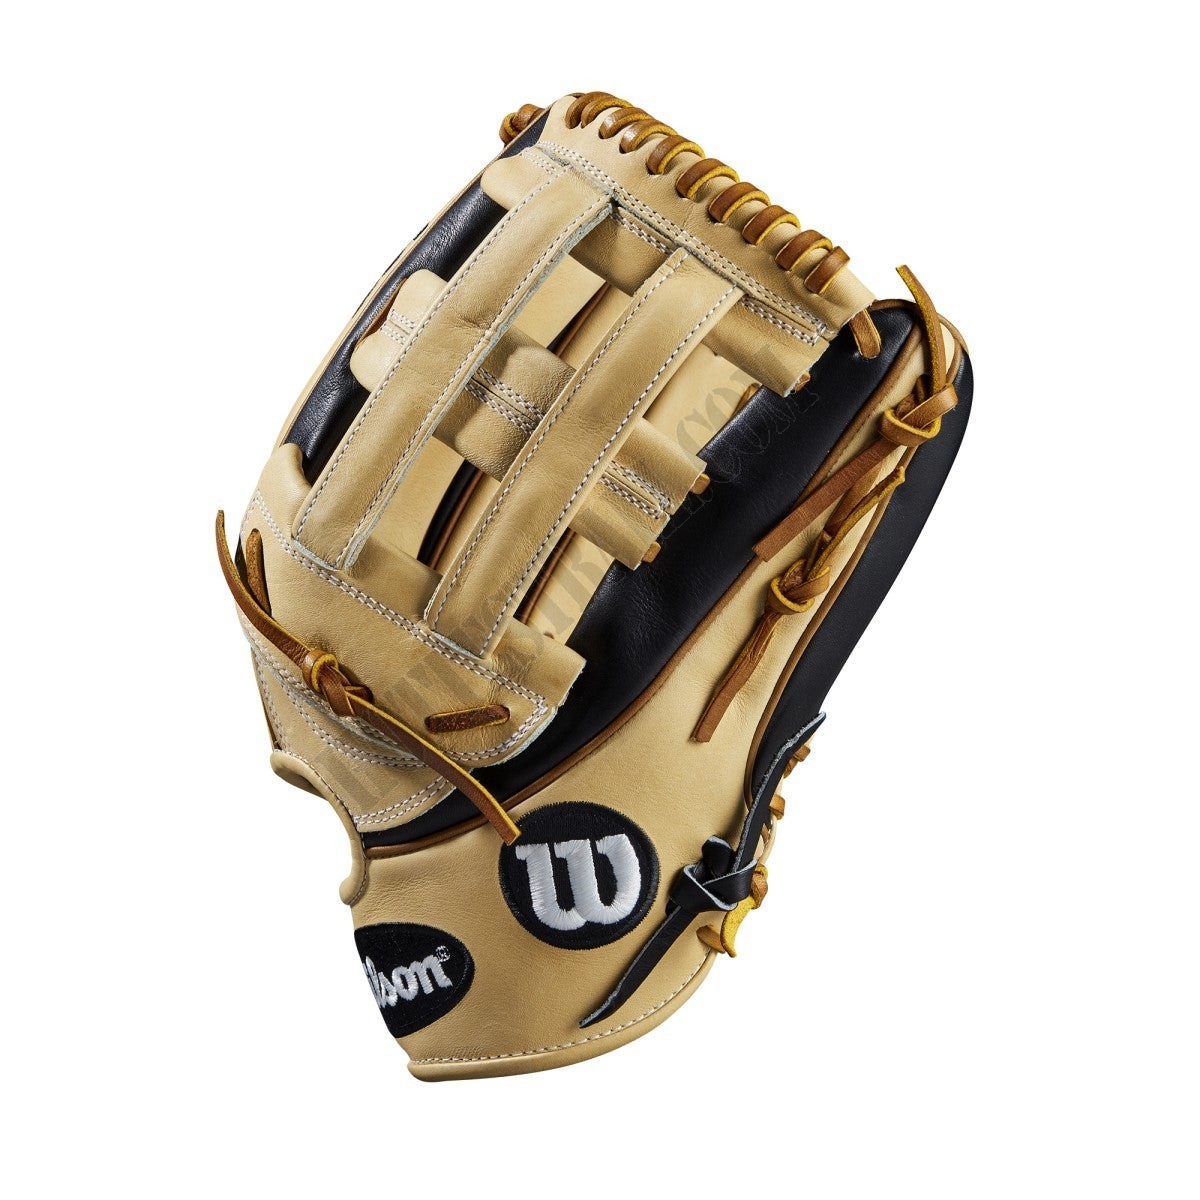 2020 A2K 1799 12.75" Outfield Baseball Glove ● Wilson Promotions - -3